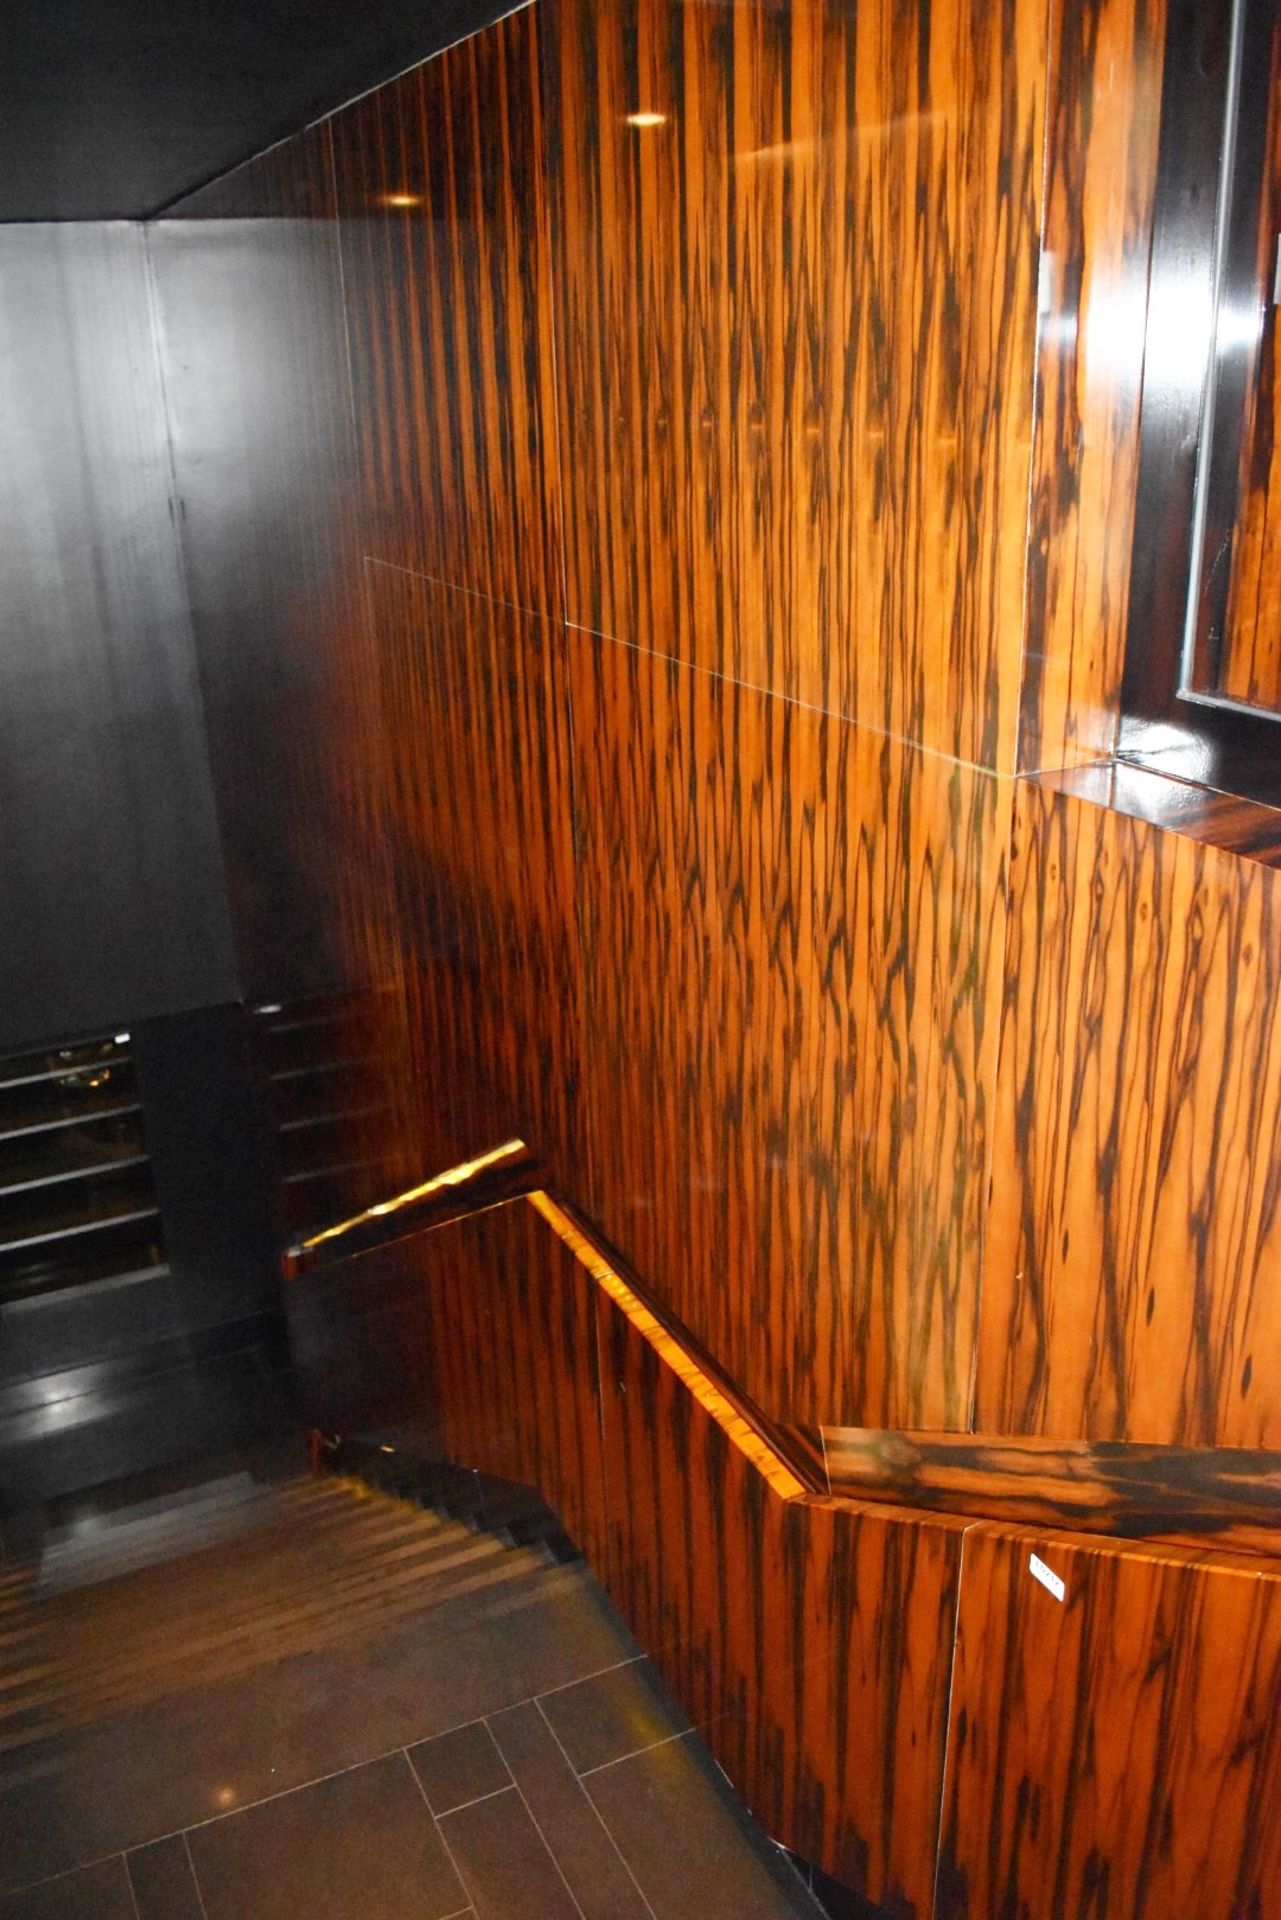 1 x Zebrano Wood Stair Panelling With Integrated Illuminated Hand Rail - Five Metres In Length - - Image 3 of 6